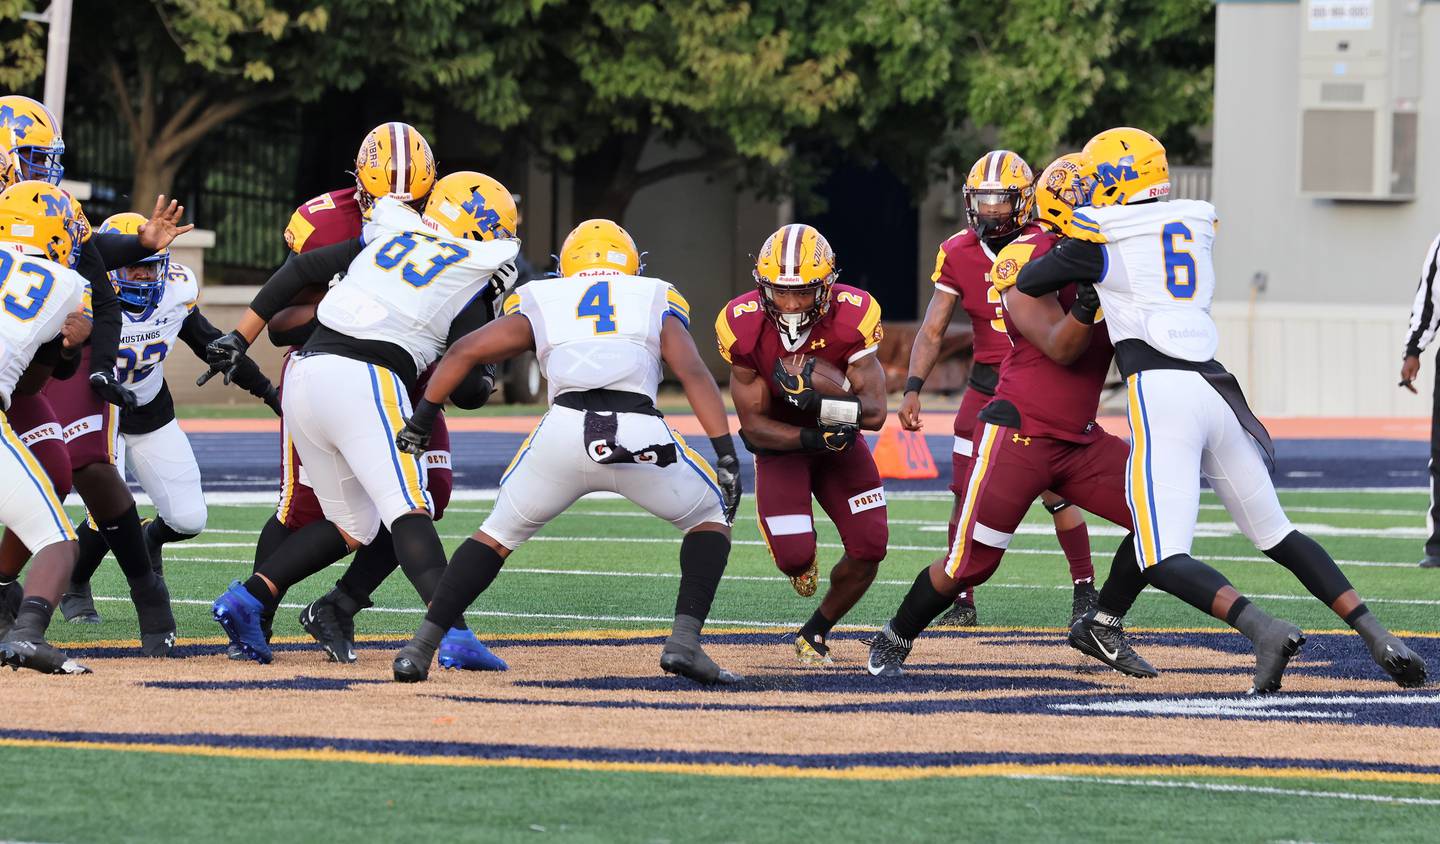 Dunbar's Tristen Kenan looks for running space during Thursday's Baltimore City football game against Mervo. Kenan scored twice as the No. 6 Poets defeated the seventh-ranked Mustangs, 24-20, in front of nearly 6,500 at Morgan State University.